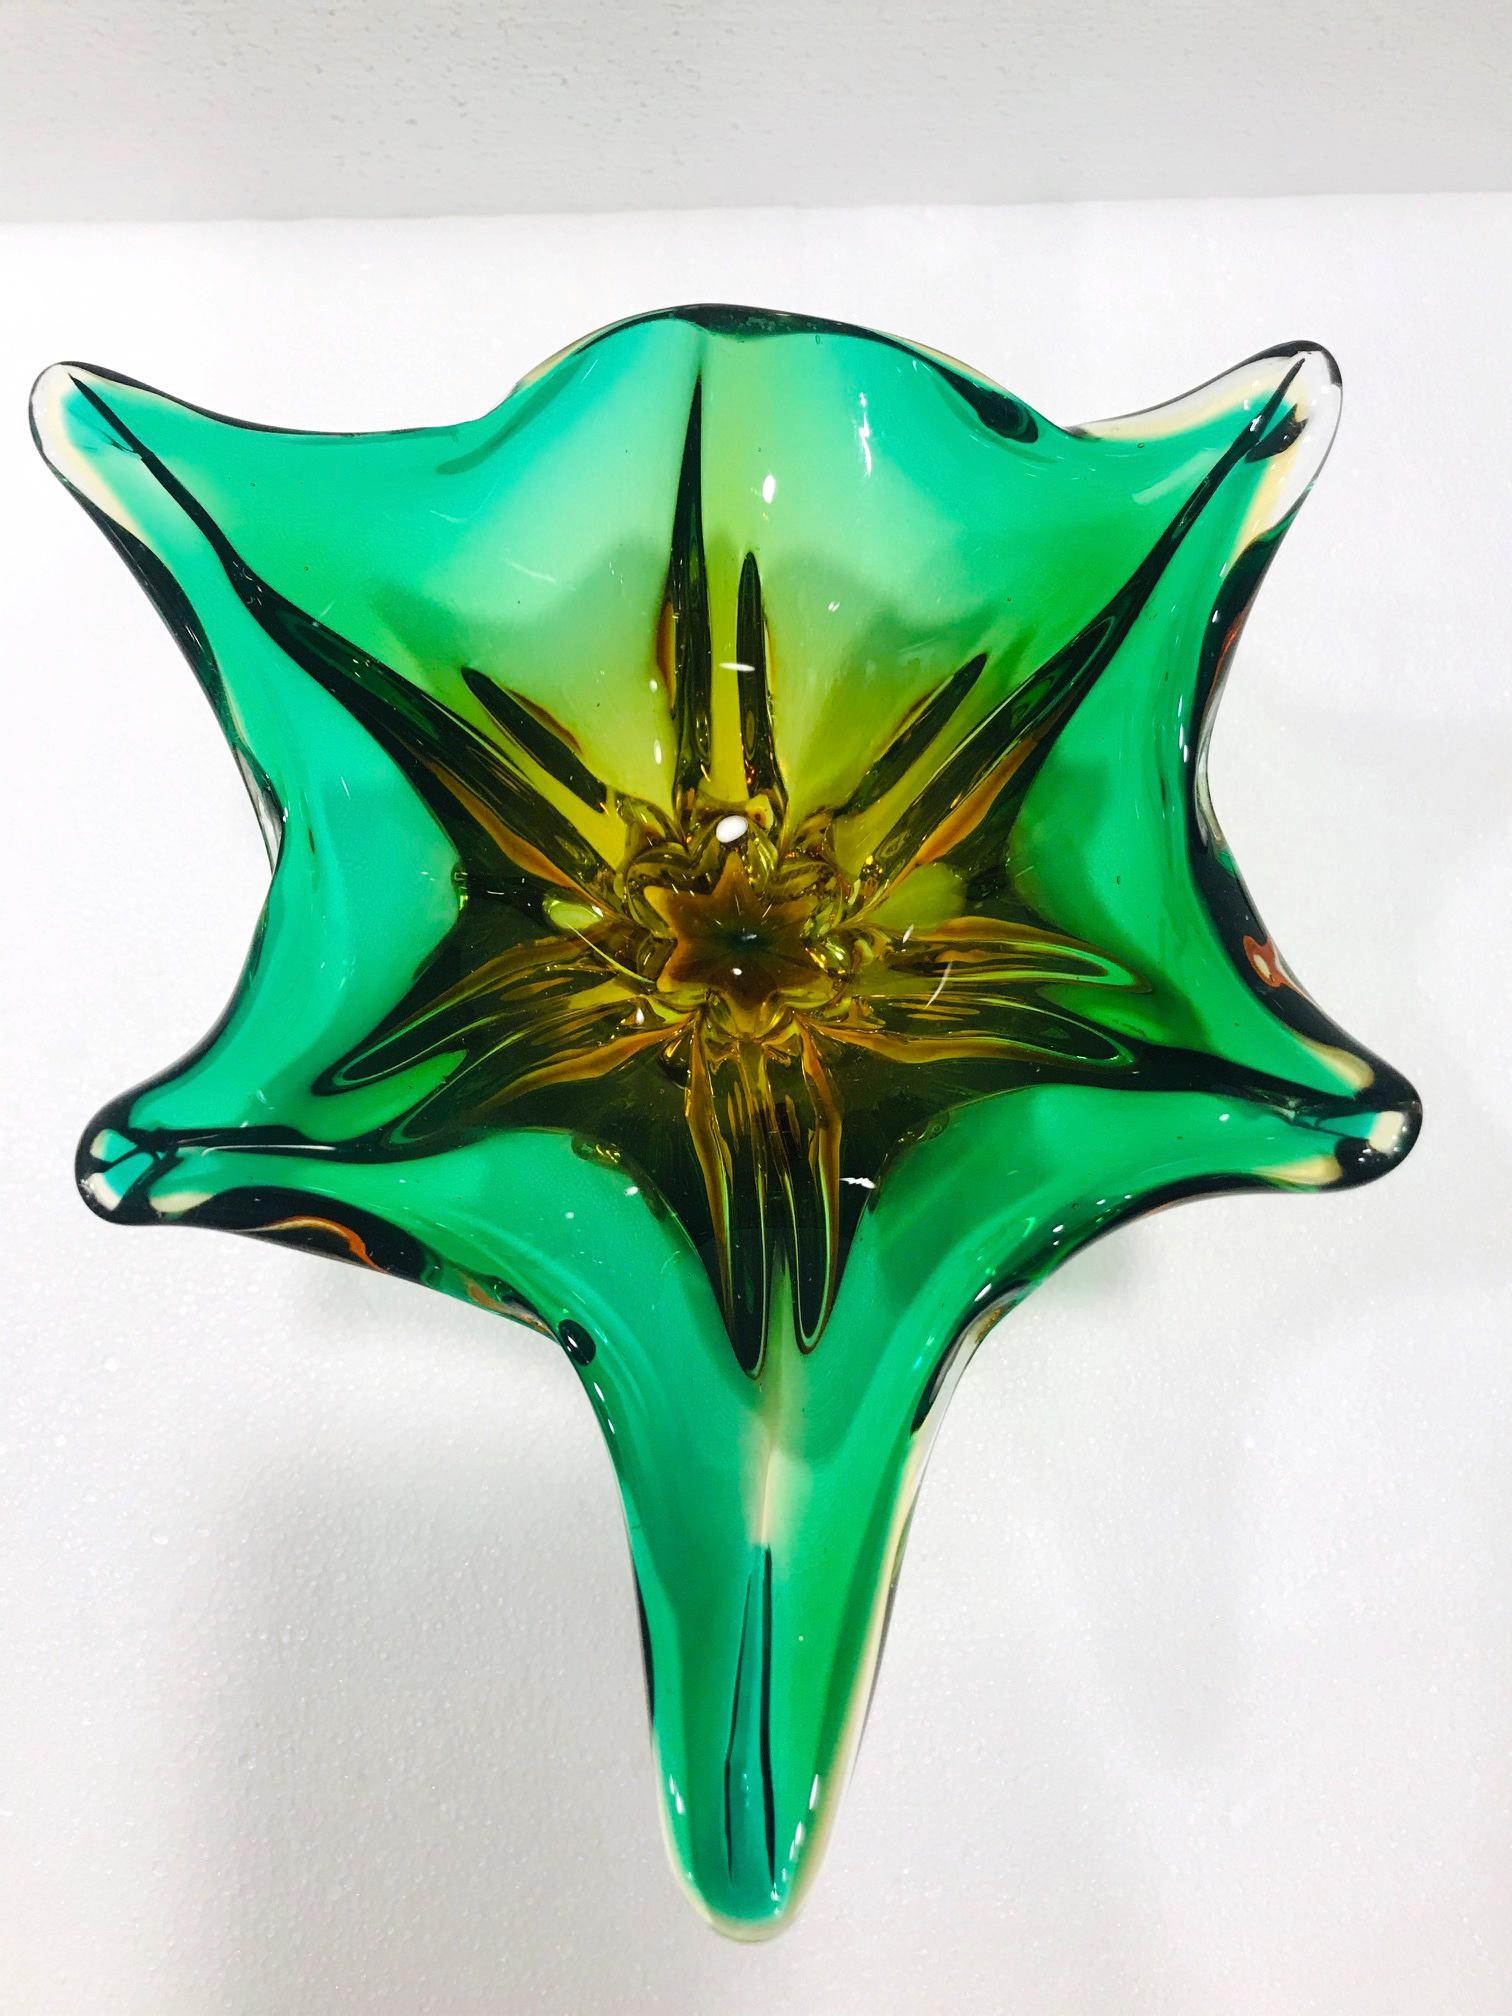 Mid-Century Modern Abstract Murano Glass Vase in Green and Gold, Italy c. 1950s 1